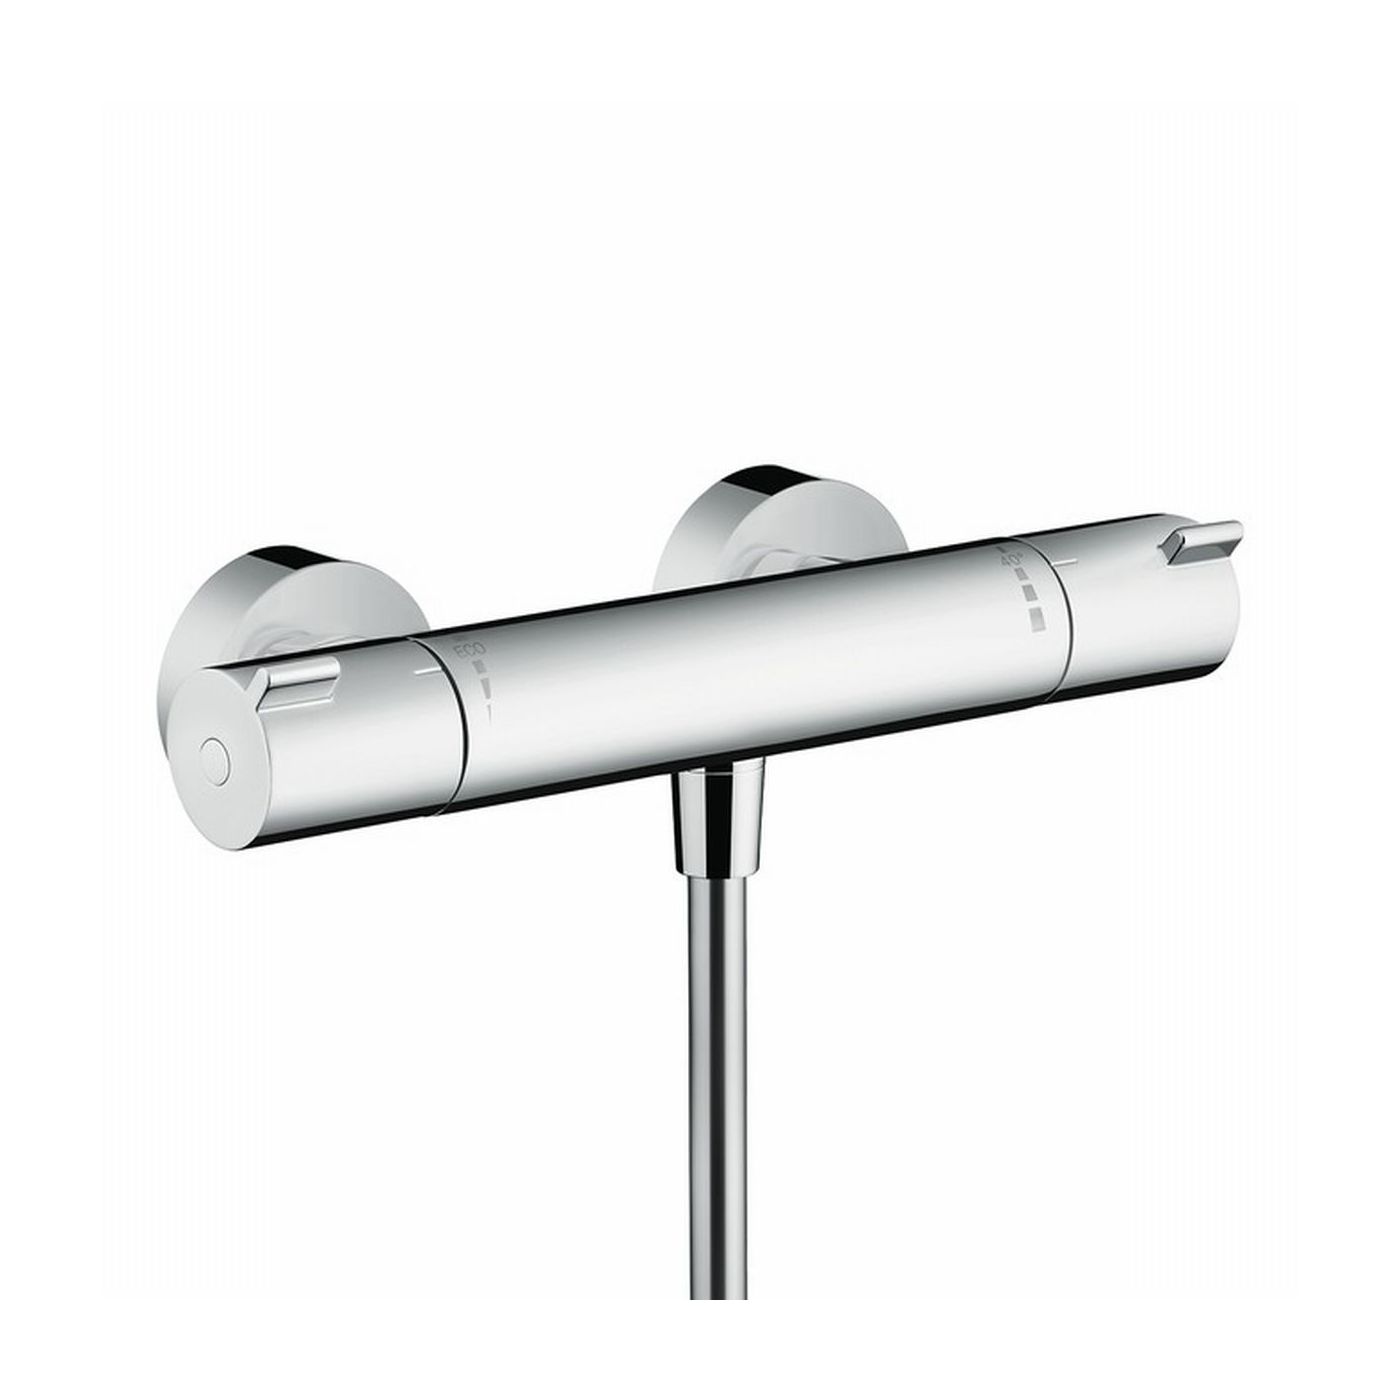 Hansgrohe Ecostat 1001 CL douchethermostaat chroom